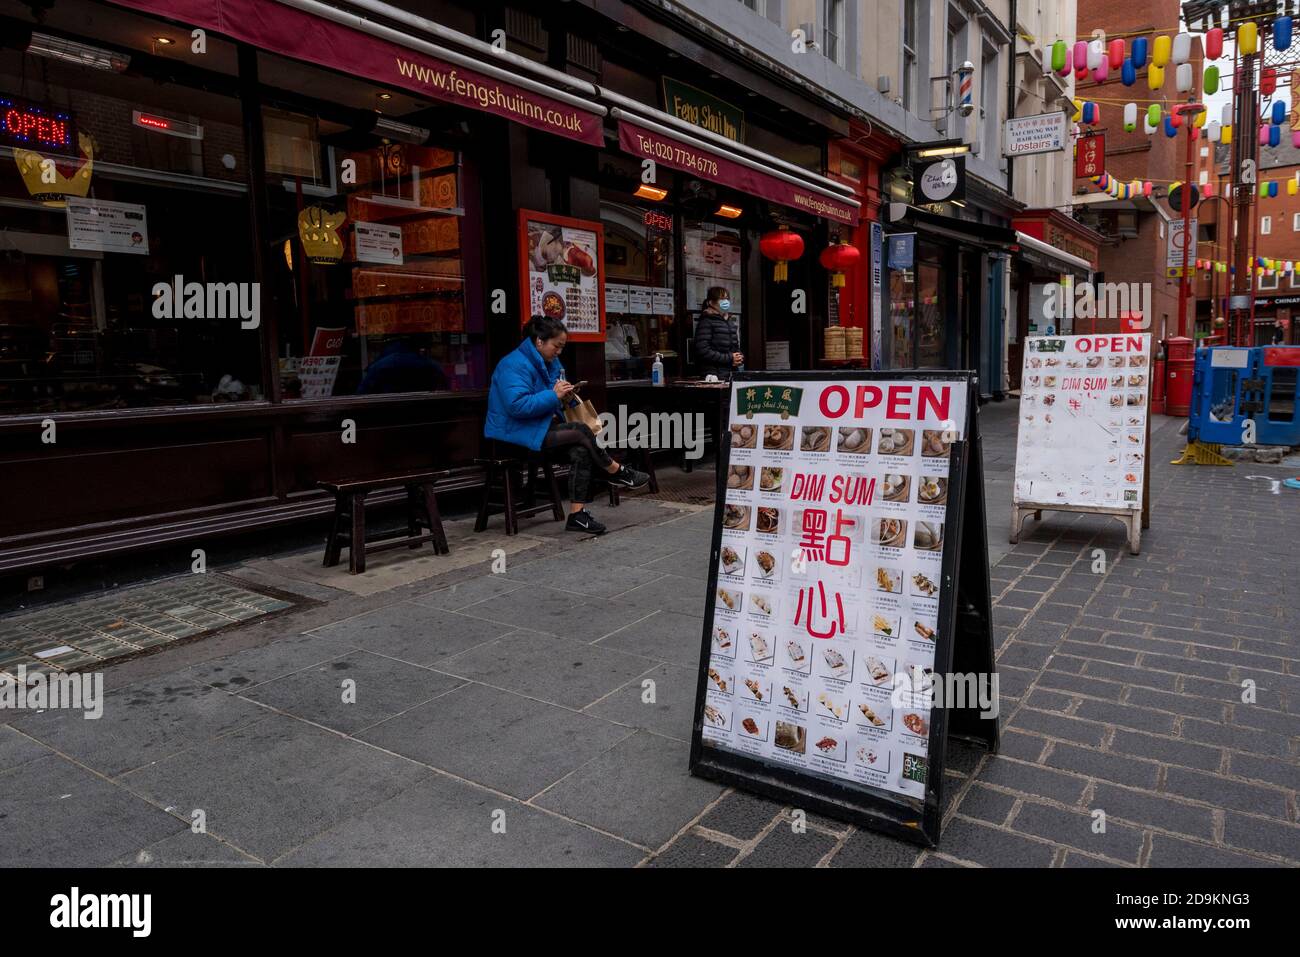 London, UK.  6 November 2020. Takeaway dim sum available at a restaurant in a quiet Chinatown on day 2 of the second day of lockdown in England imposed by the UK government.  Restrictions are expected to last until 2 December in an attempt to control the spread of the ongoing coronavirus pandemic.  Credit: Stephen Chung / Alamy Live News Stock Photo